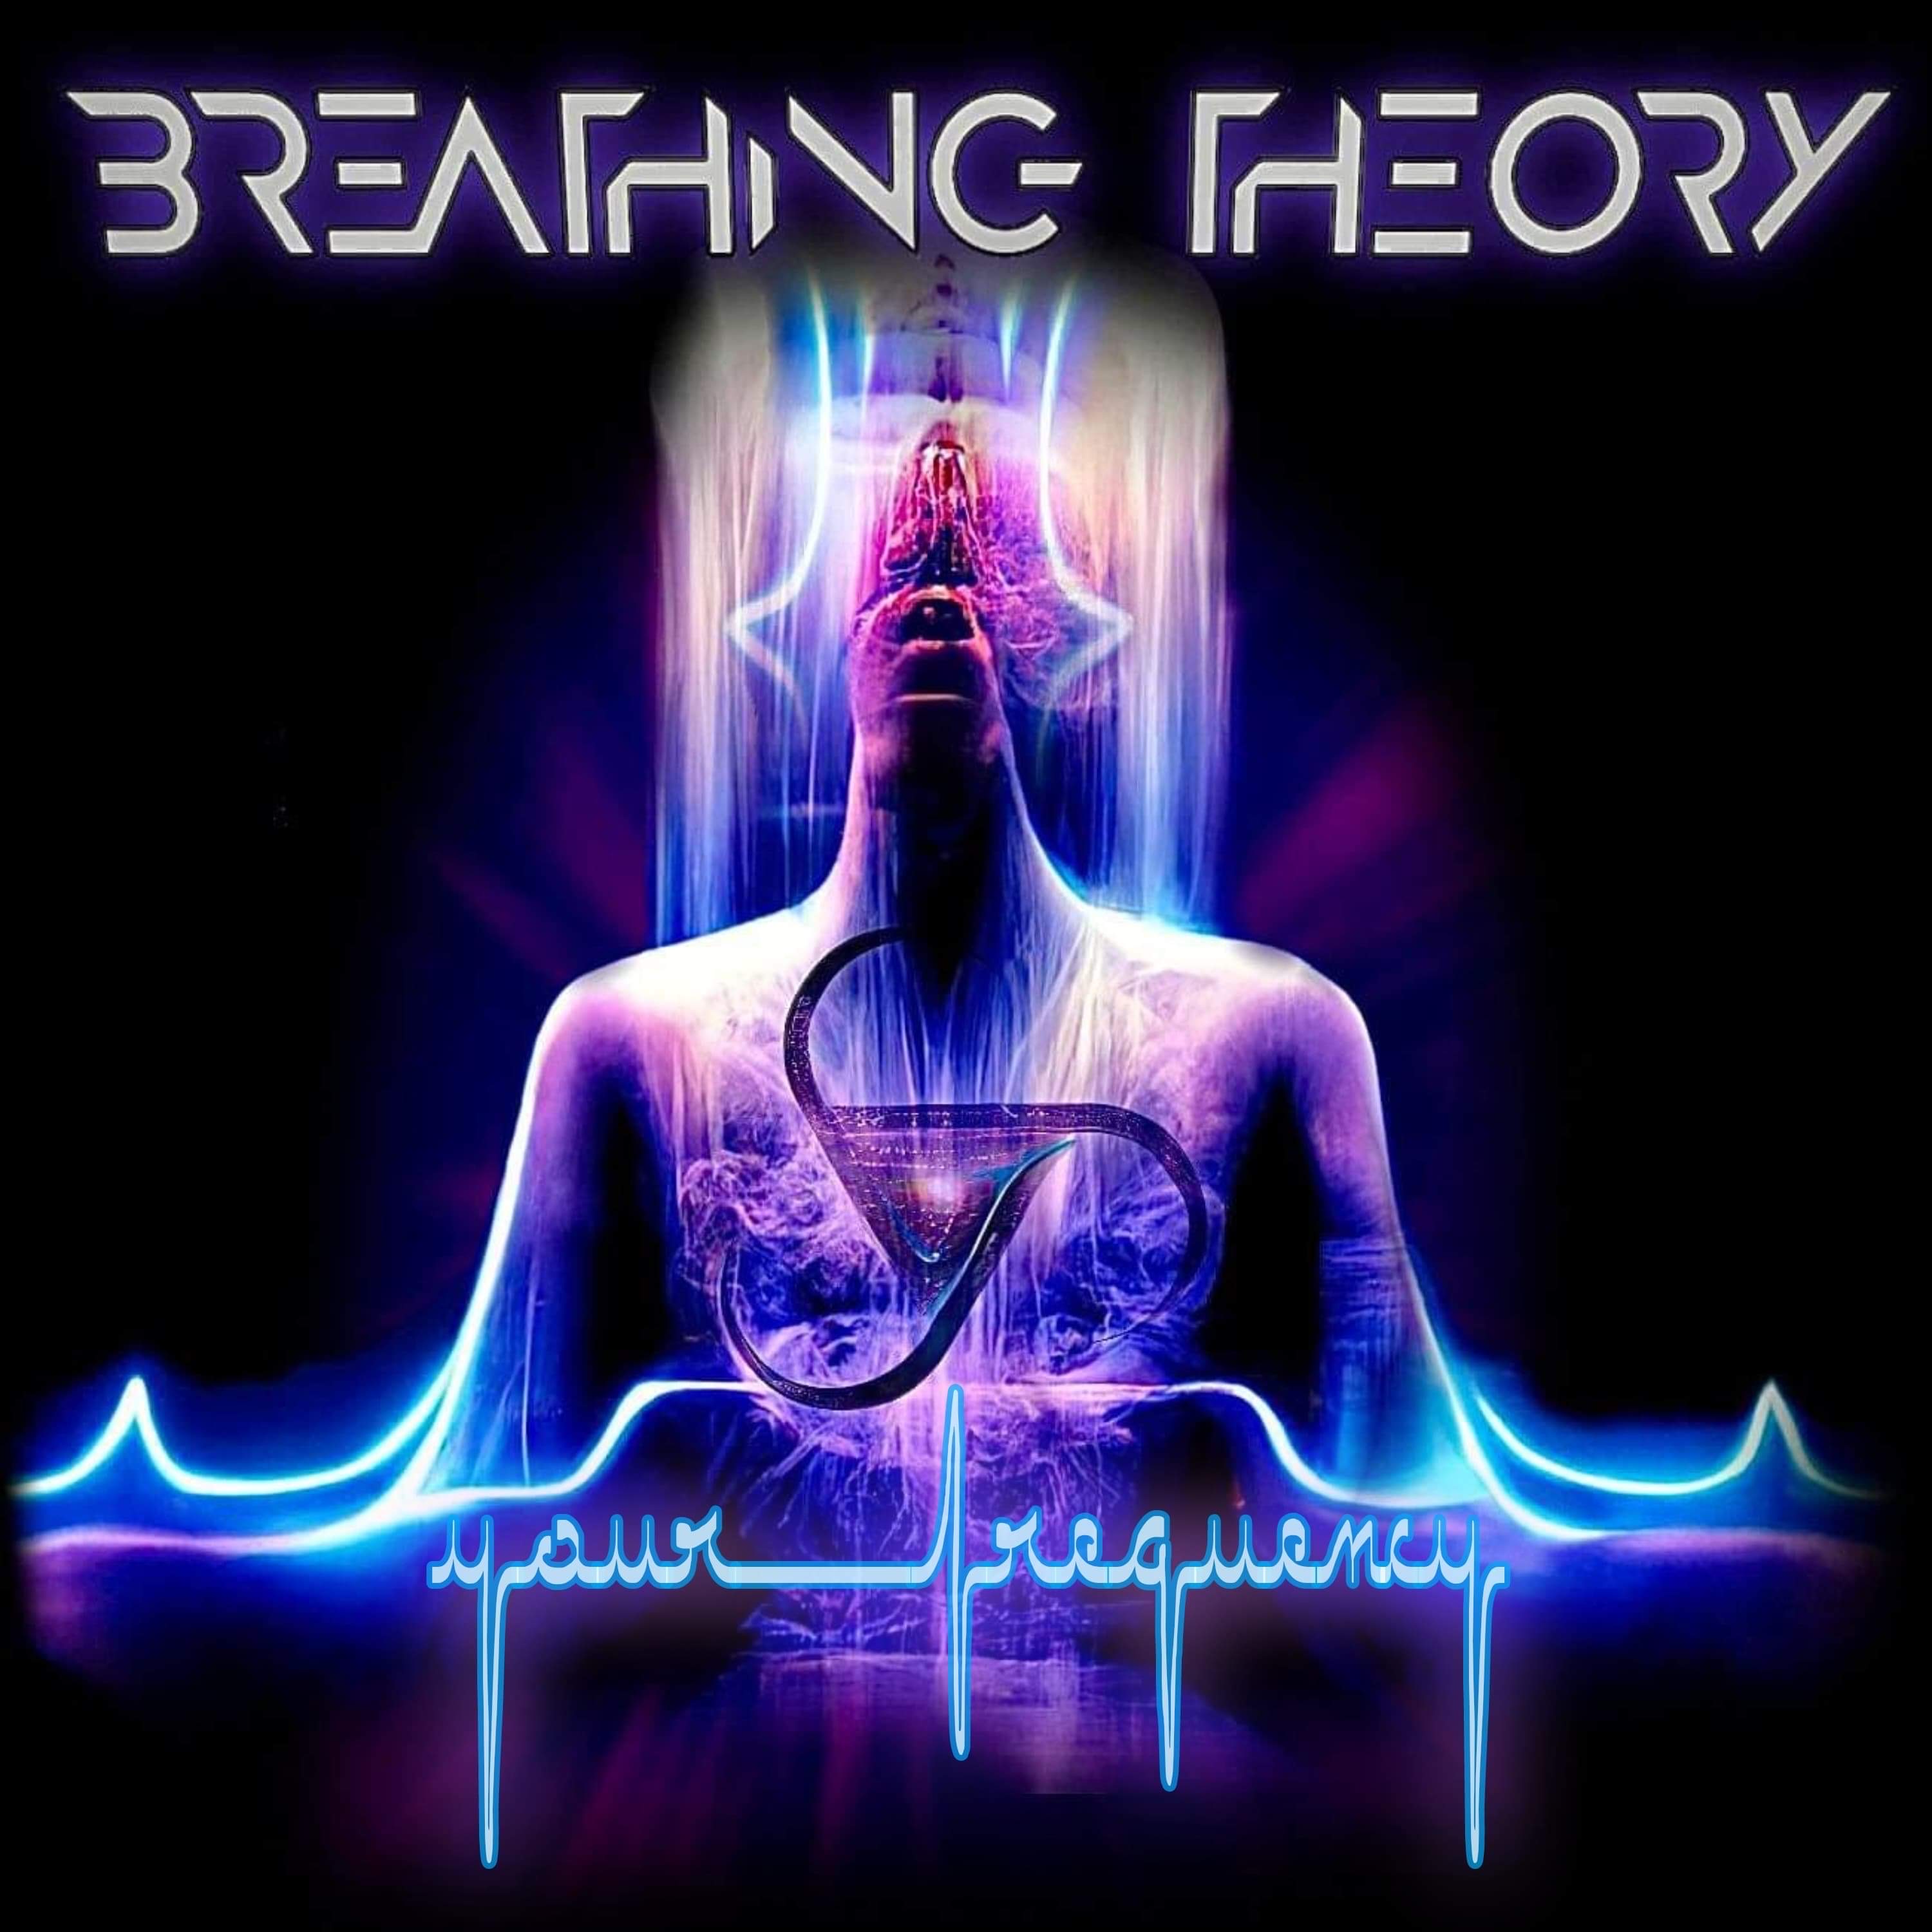 Art for Your Frequency by Breathing Theory